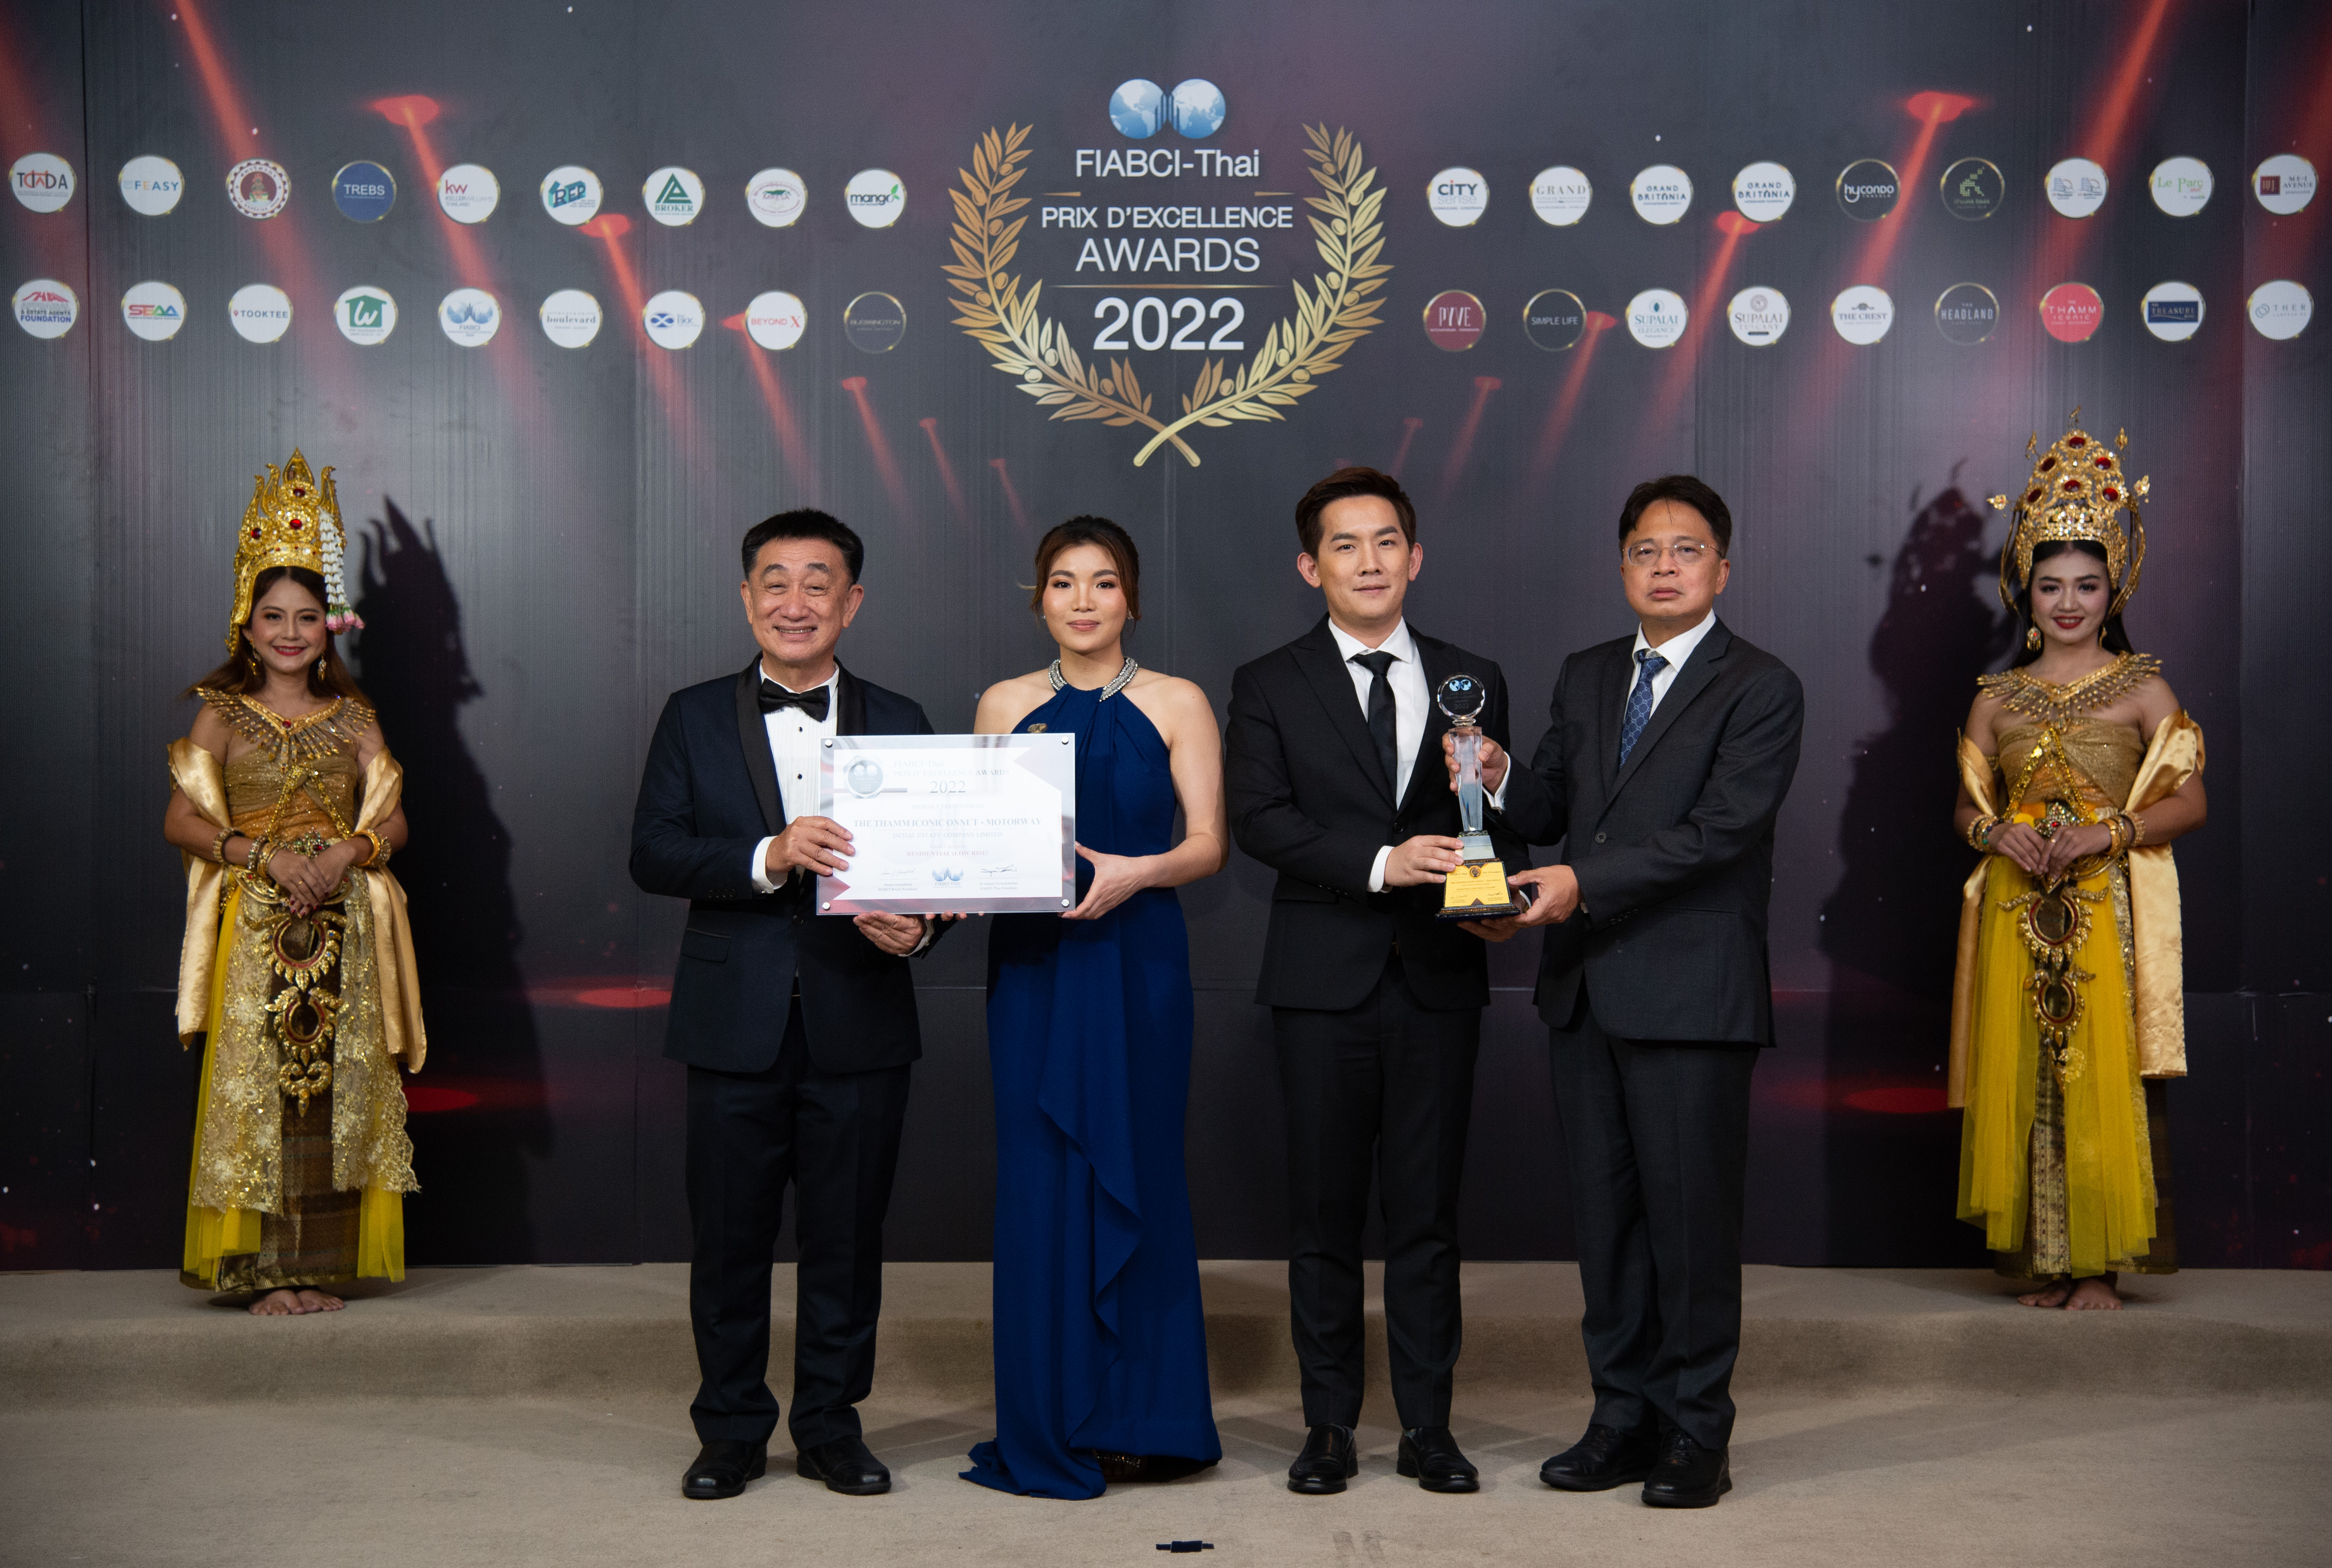 The Thamm Iconic Onnut - Motorway: FIABCI-Thai Prix D’Excellence Award 2022